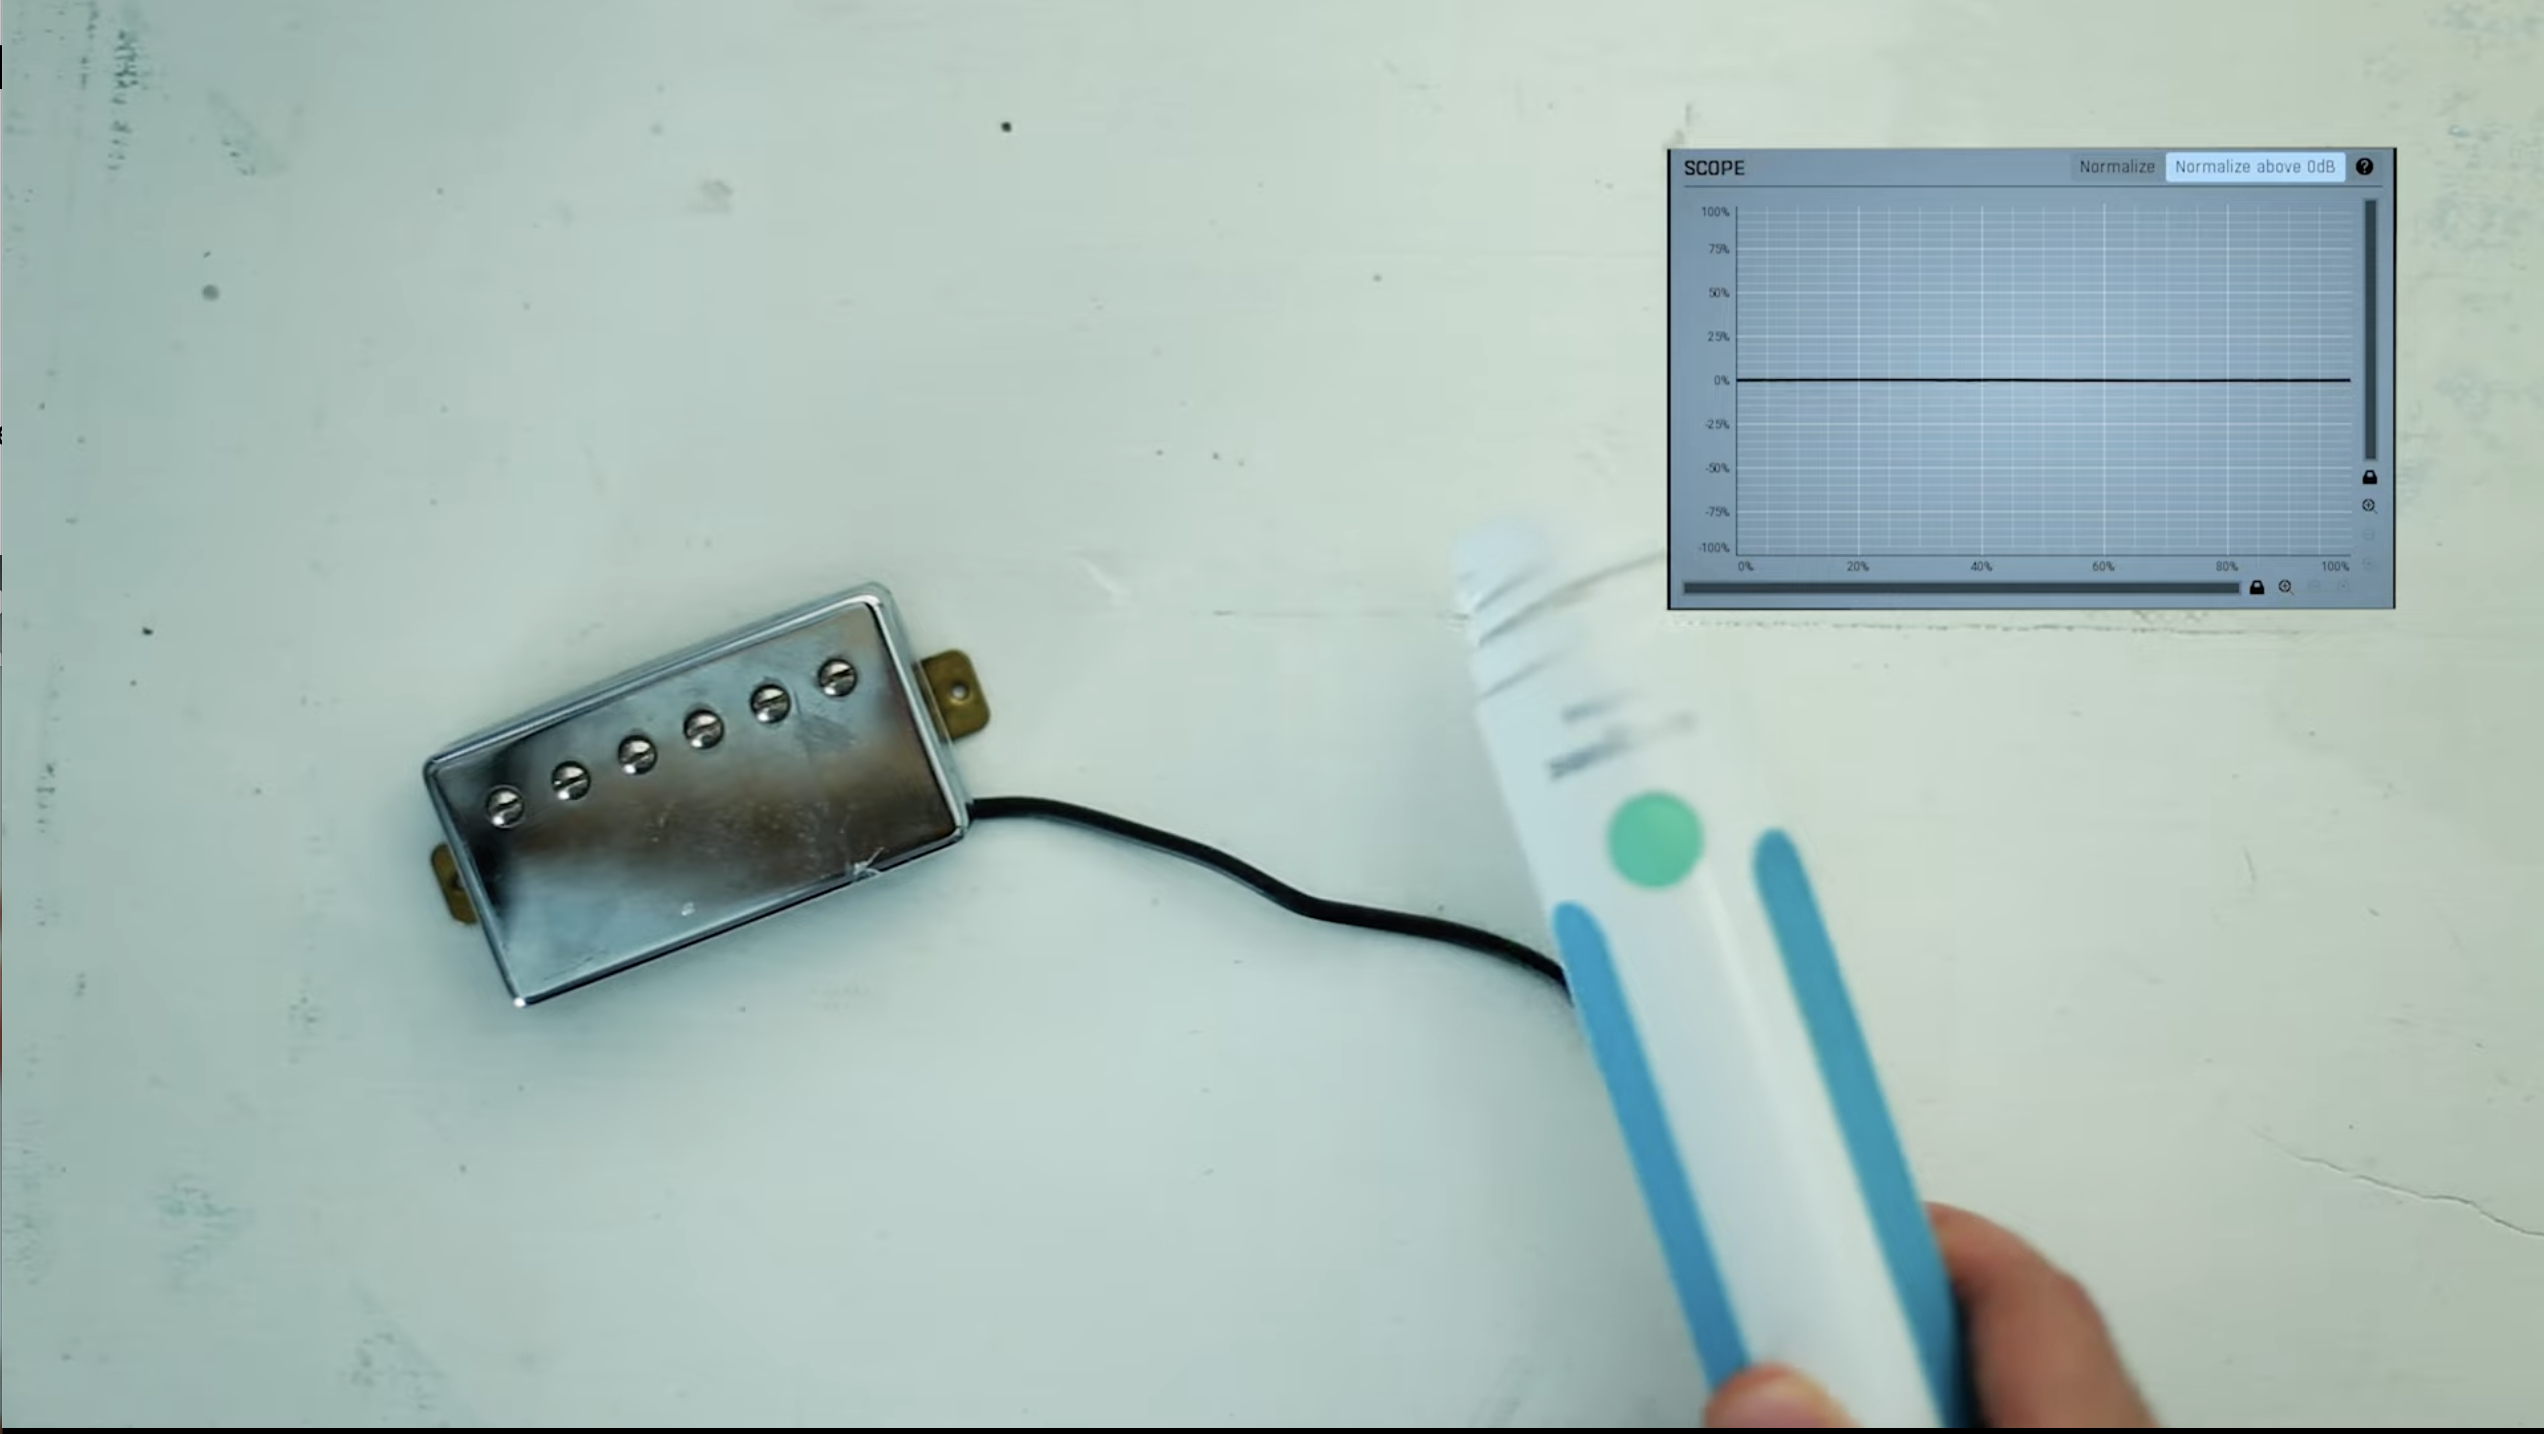 This Toothbrush is a Synthesizer! (also: FREE SAMPLE LIBRARY)￼